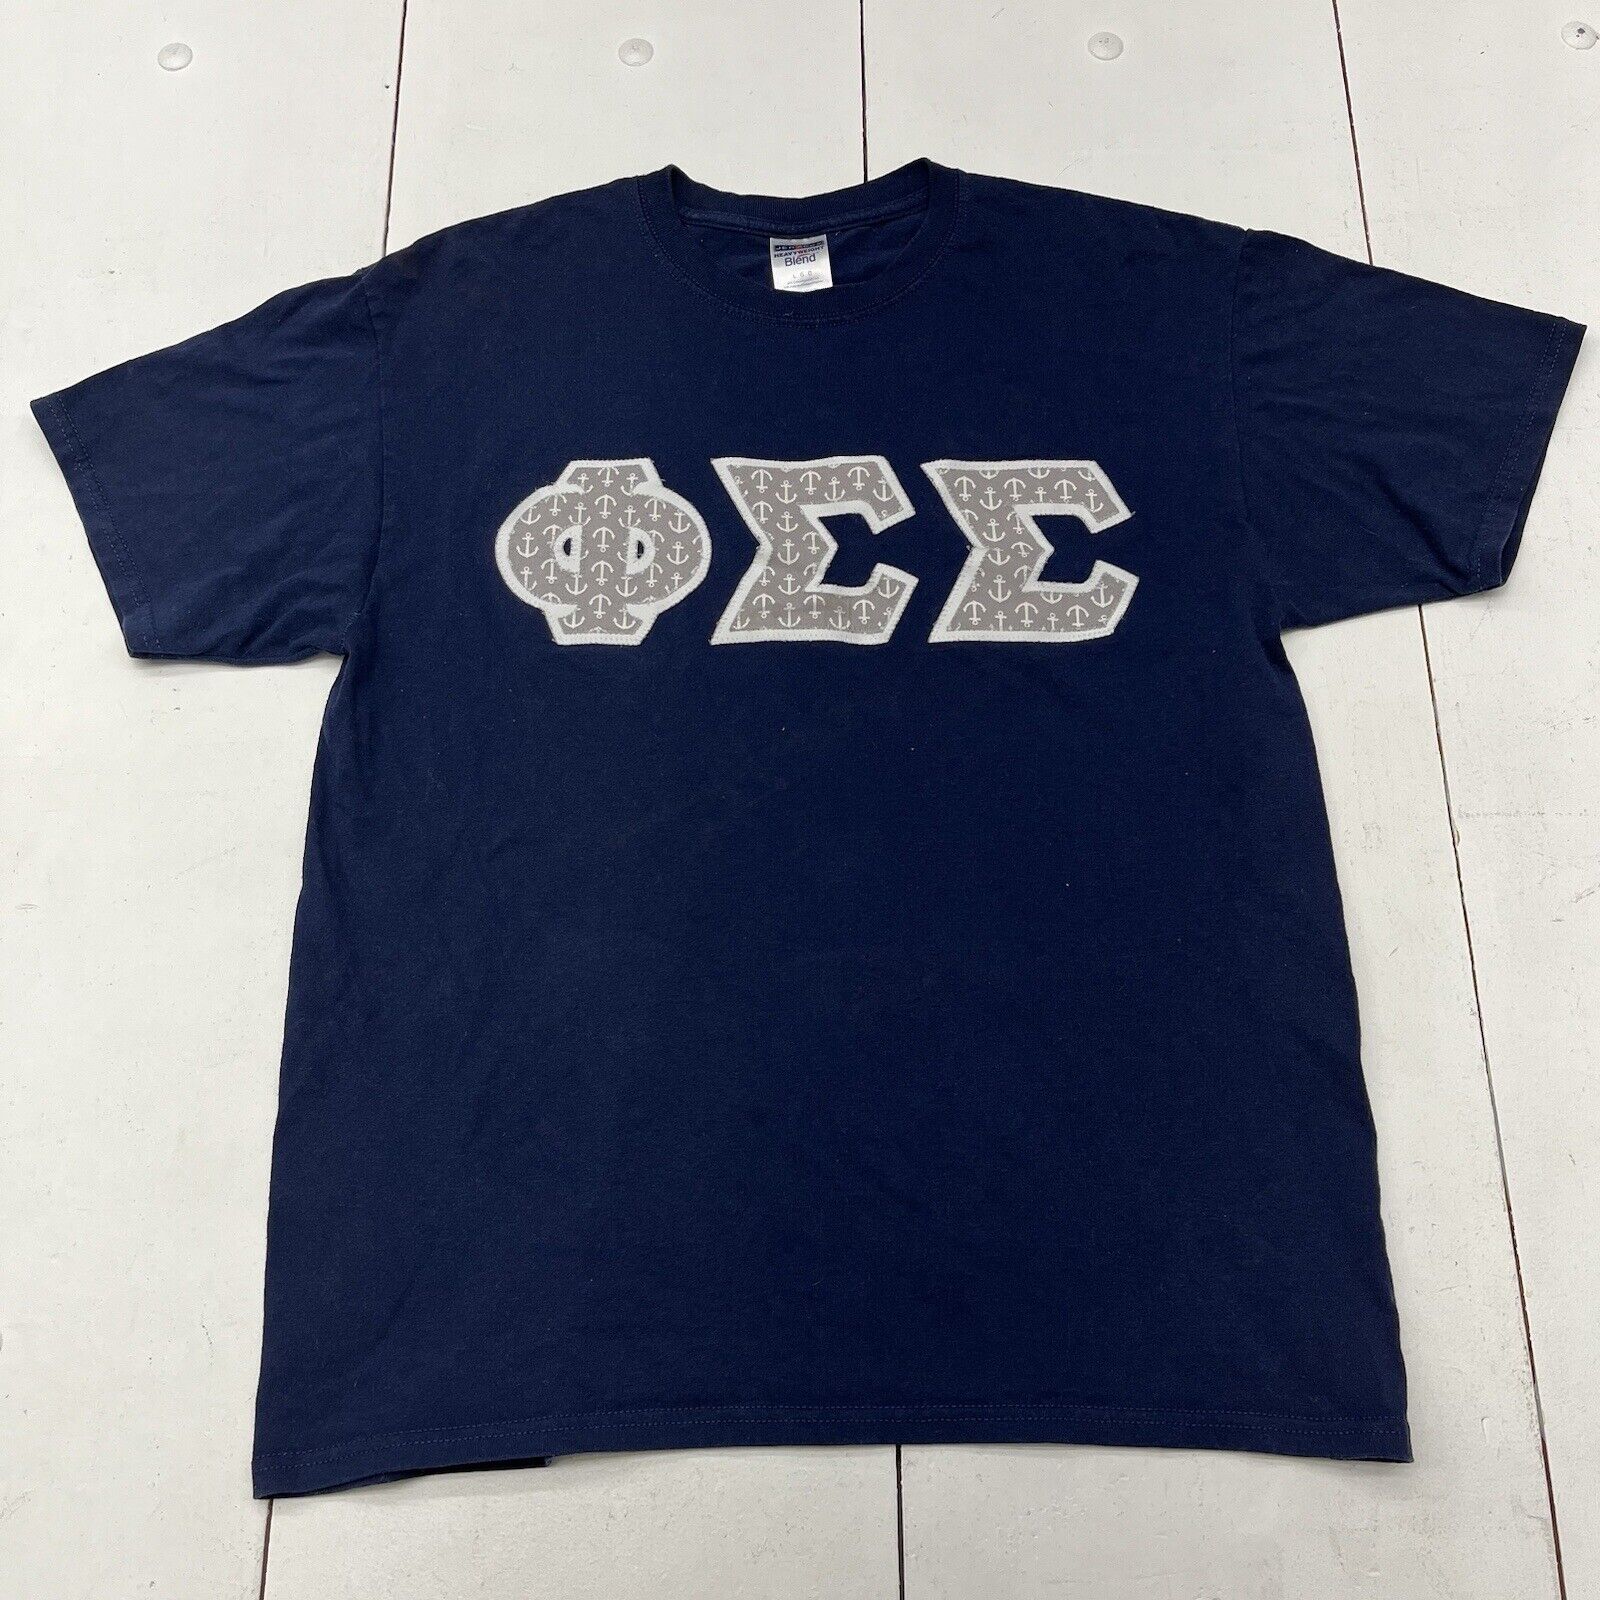 Jerzees Navy Blue Embroidered Greek Letters Sorority/Fraternity T-Shirt Adult L